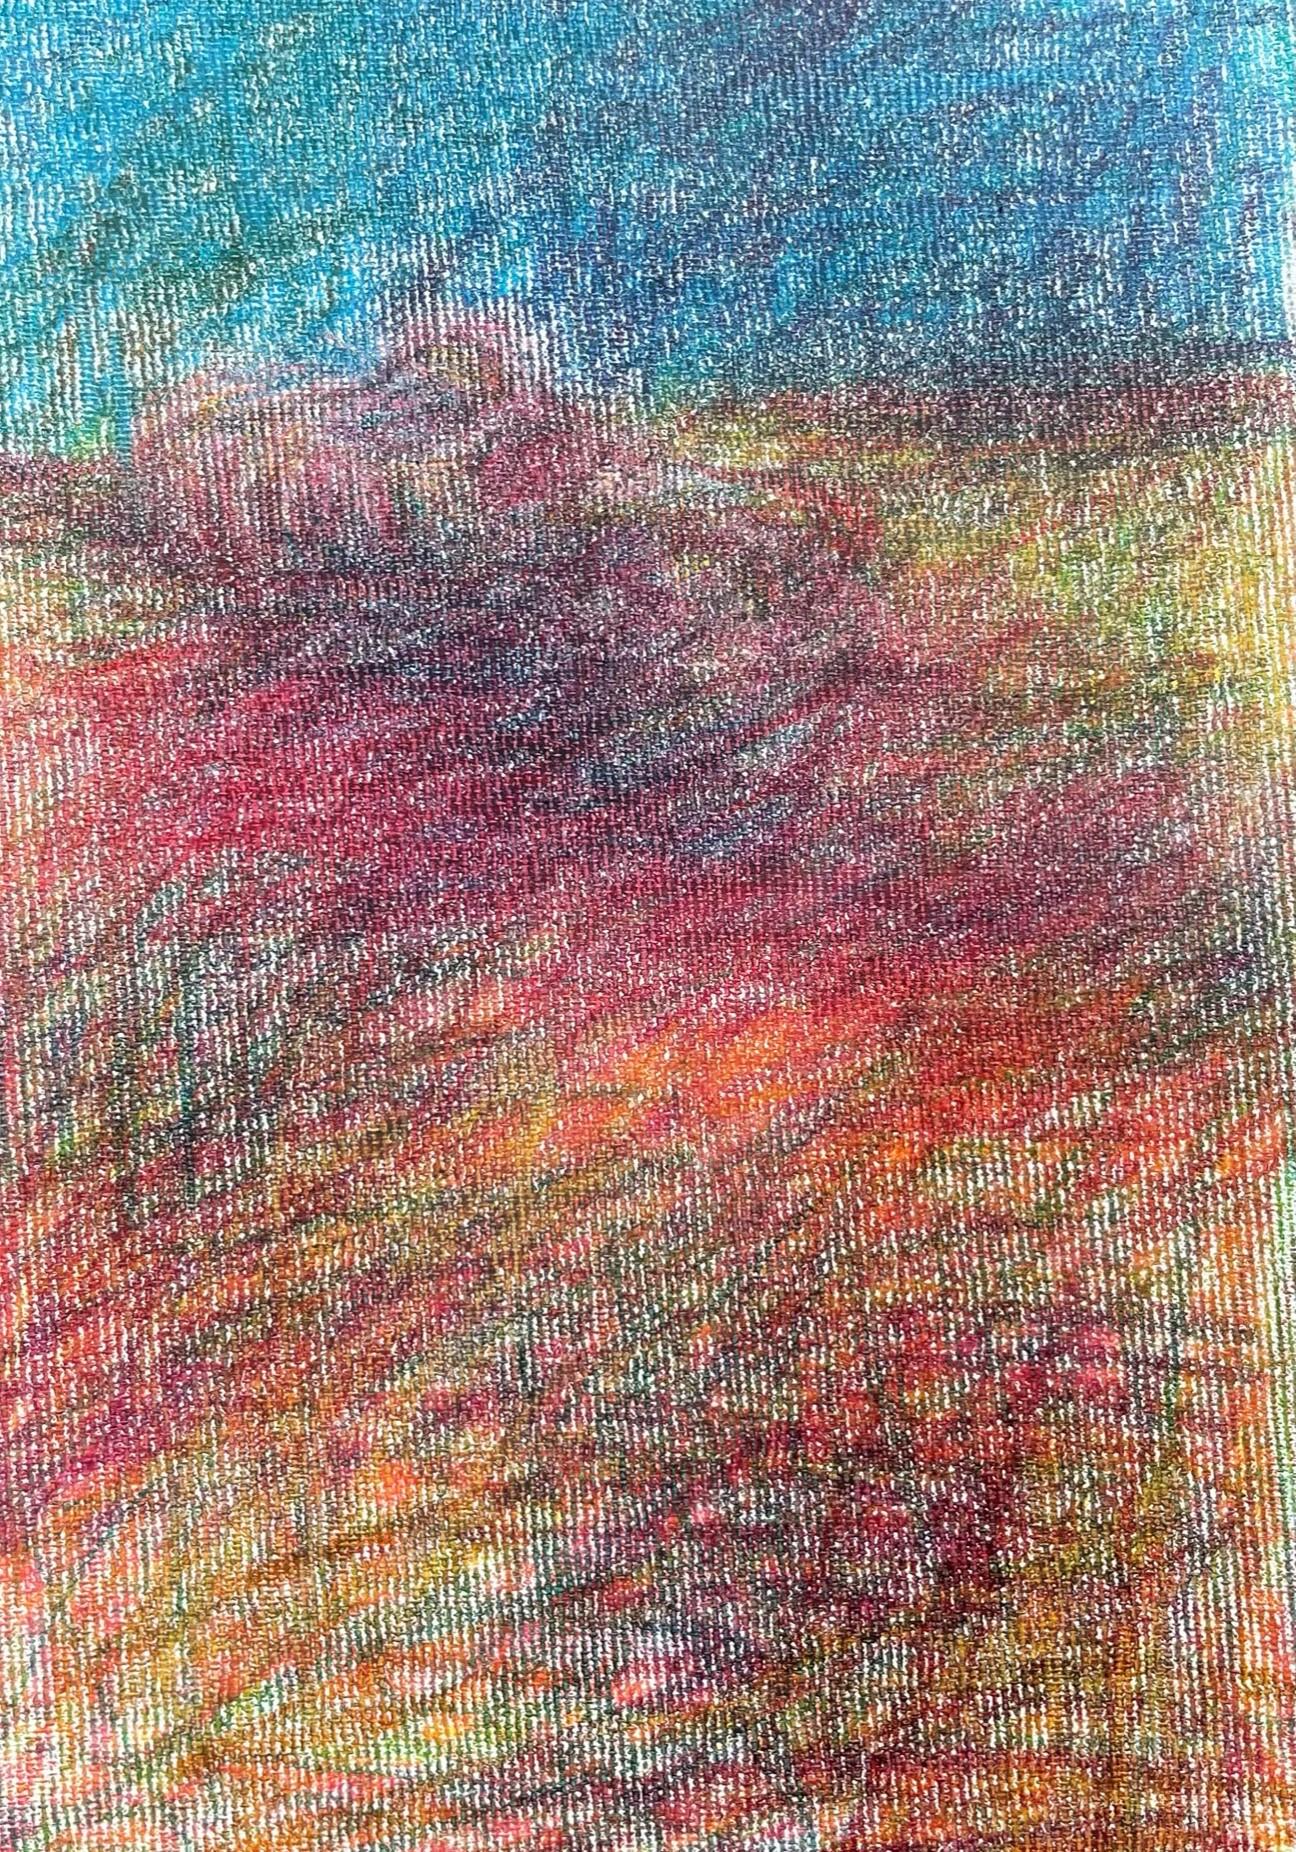 Body in the Field #5 - Blue, Red, Drawing, Color pencil - Brown Landscape Art by Zsolt Berszán